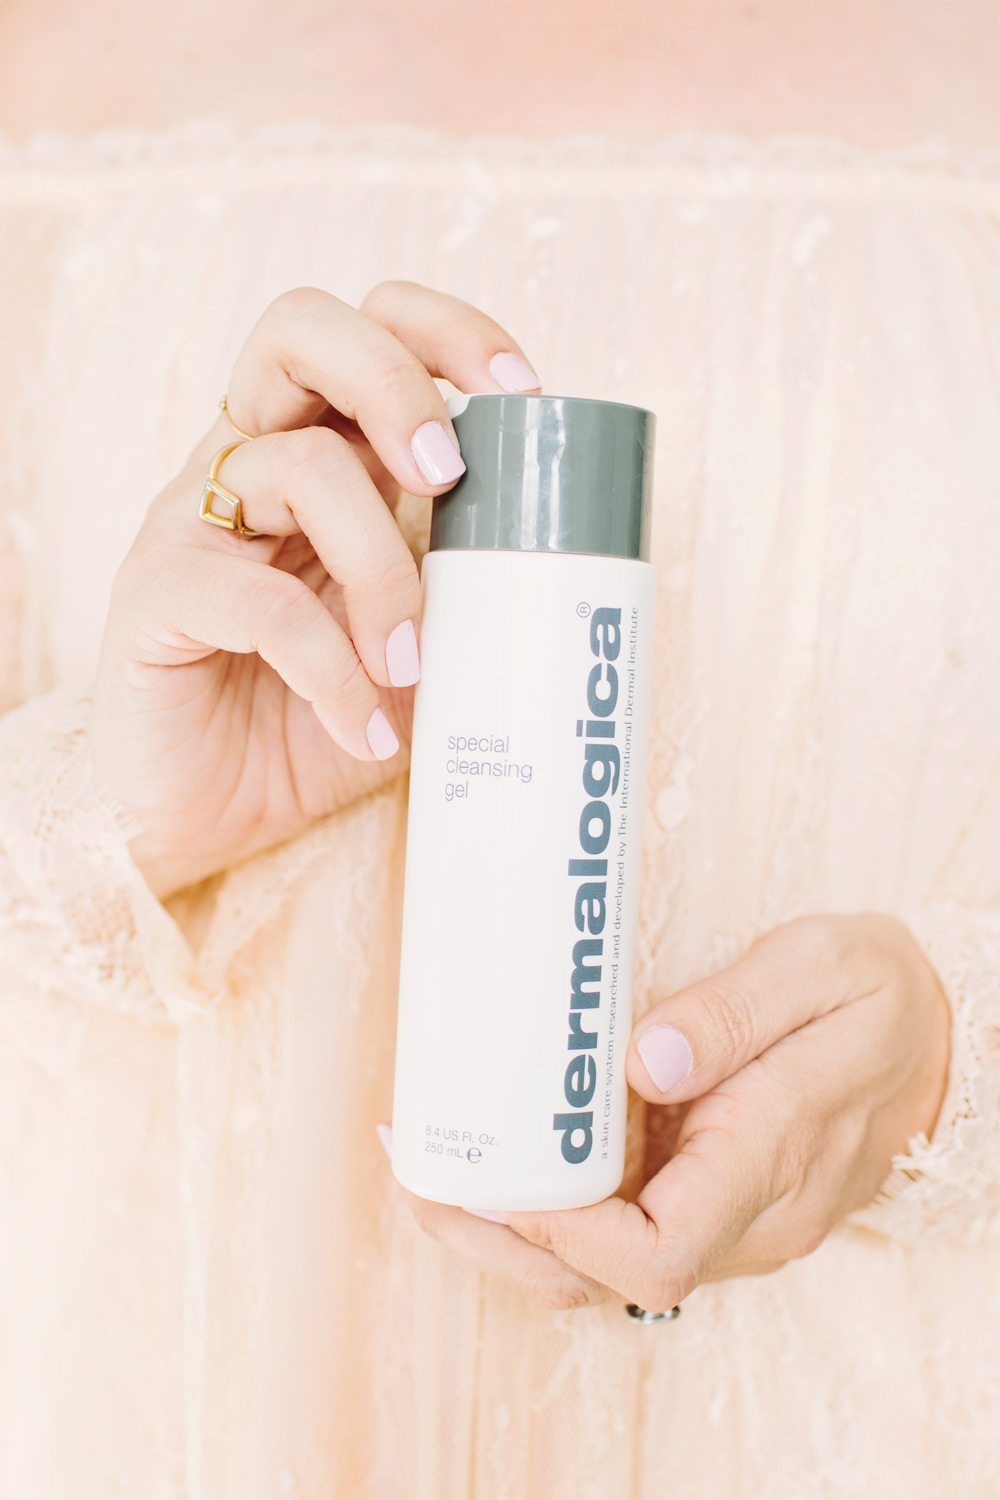 Top 10 Must-Have Dermalogica Products